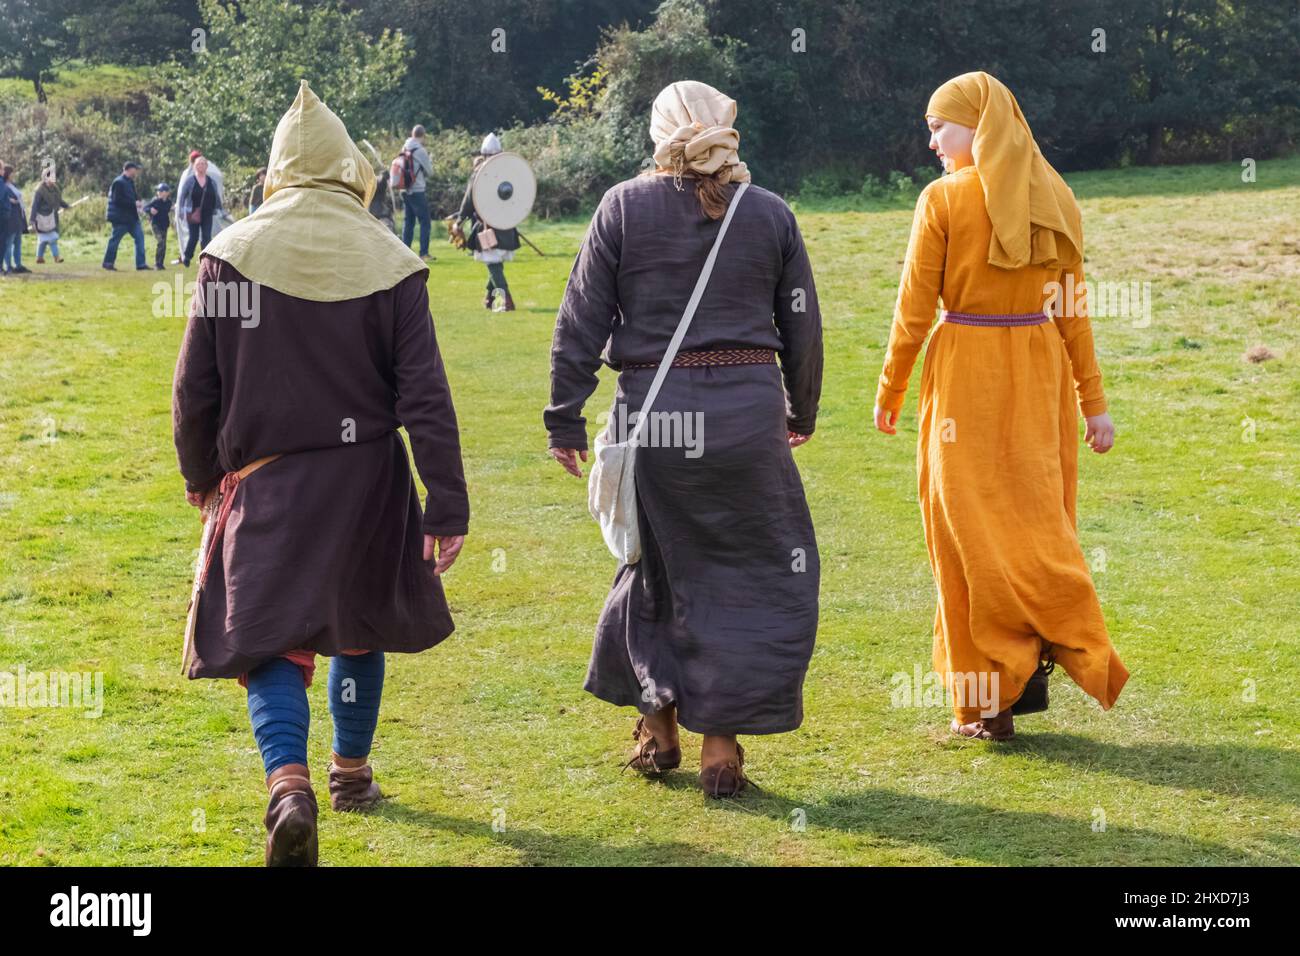 England, East Sussex, Battle, The Annual Battle of Hastings 1066 Re-enactment Festival, Participants Dressed in Medieval Costume Stock Photo